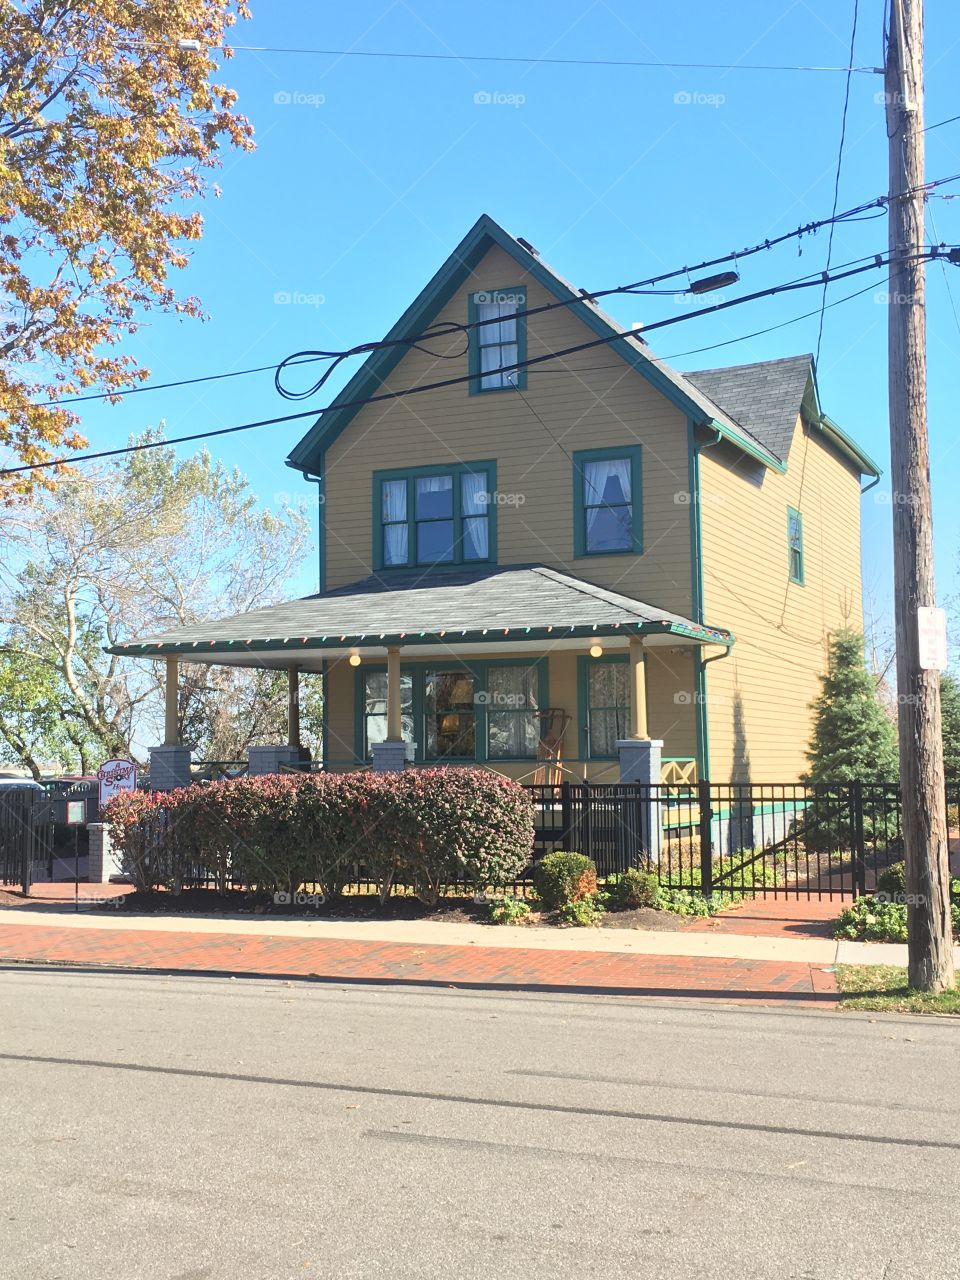 A Christmas Story House in Cleveland Ohio 